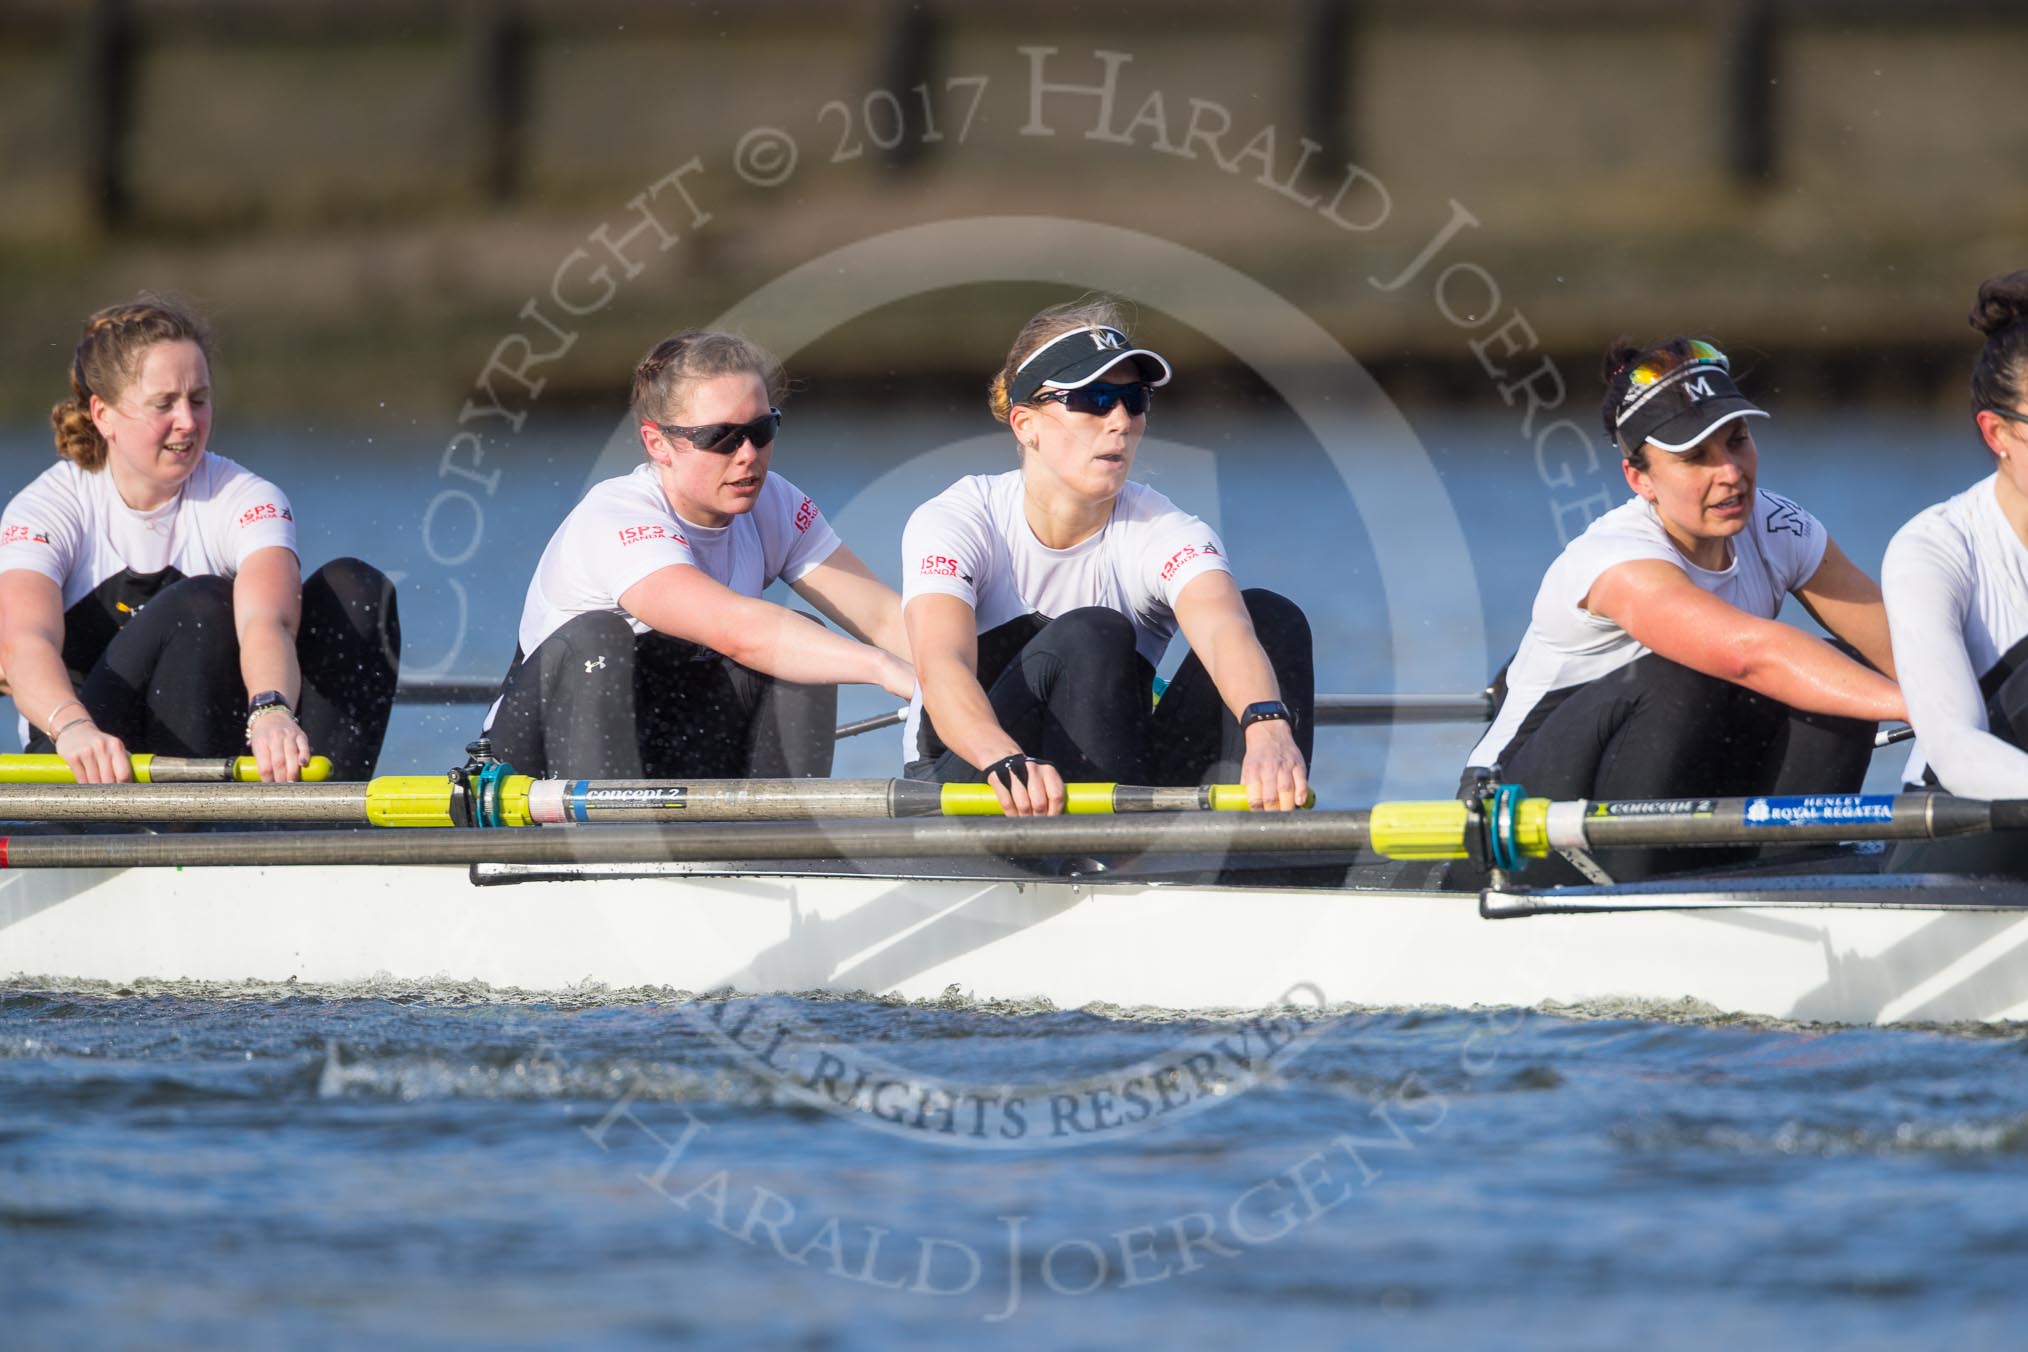 The Cancer Research UK Boat Race season 2017 - Women's Boat Race Fixture OUWBC vs Molesey BC: The Molesey boat, here 4 Claire McKeown, 5 Katie Bartlett, 6 Elo Luik, 7 Gabriella Rodriguez, stroke Ruth Whyman.
River Thames between Putney Bridge and Mortlake,
London SW15,

United Kingdom,
on 19 March 2017 at 16:05, image #91